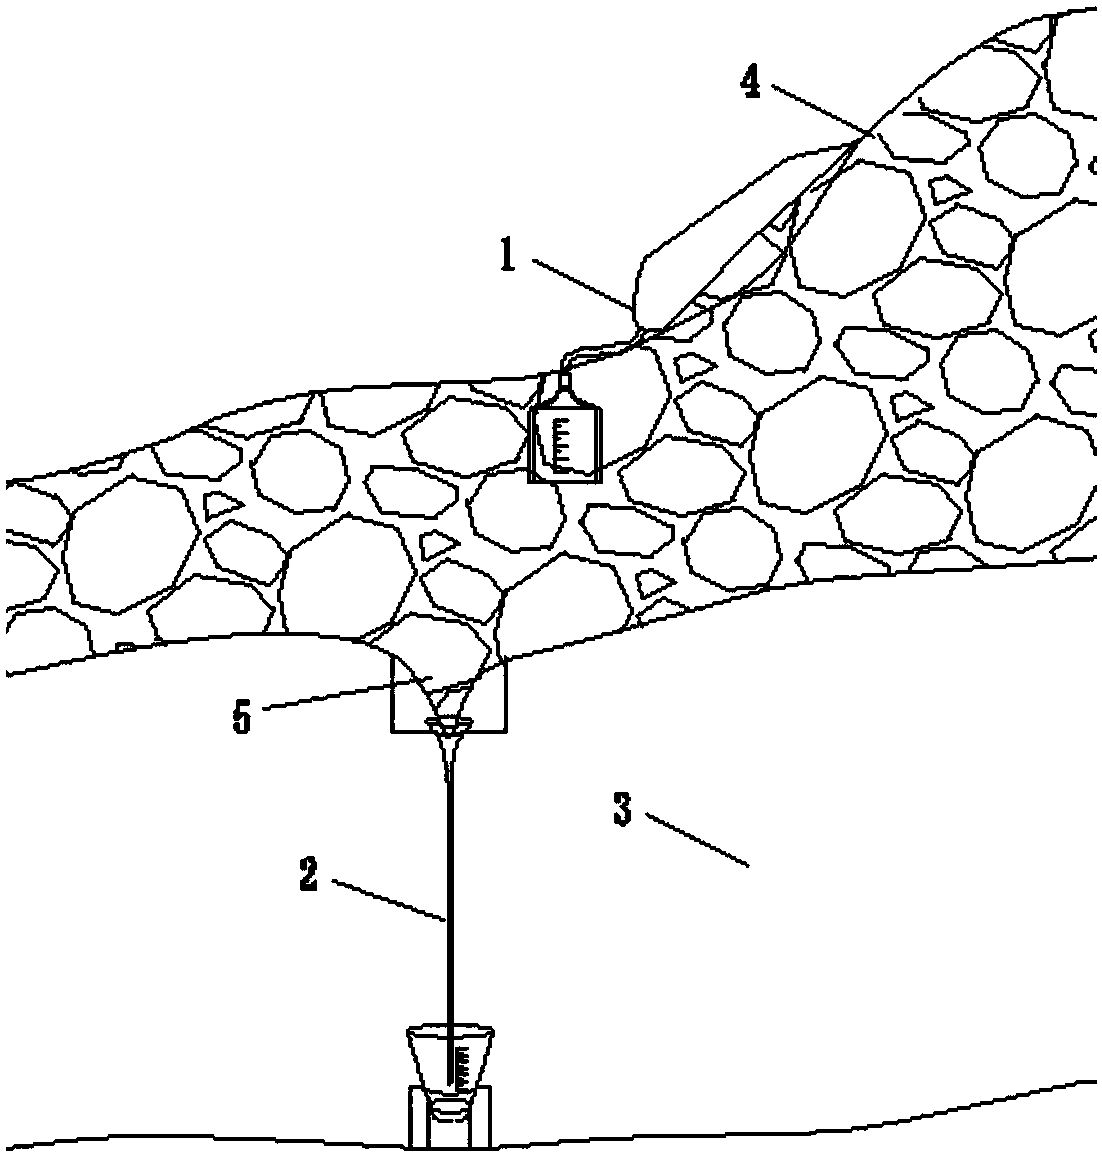 A method and device for monitoring soil and water loss in a cave system